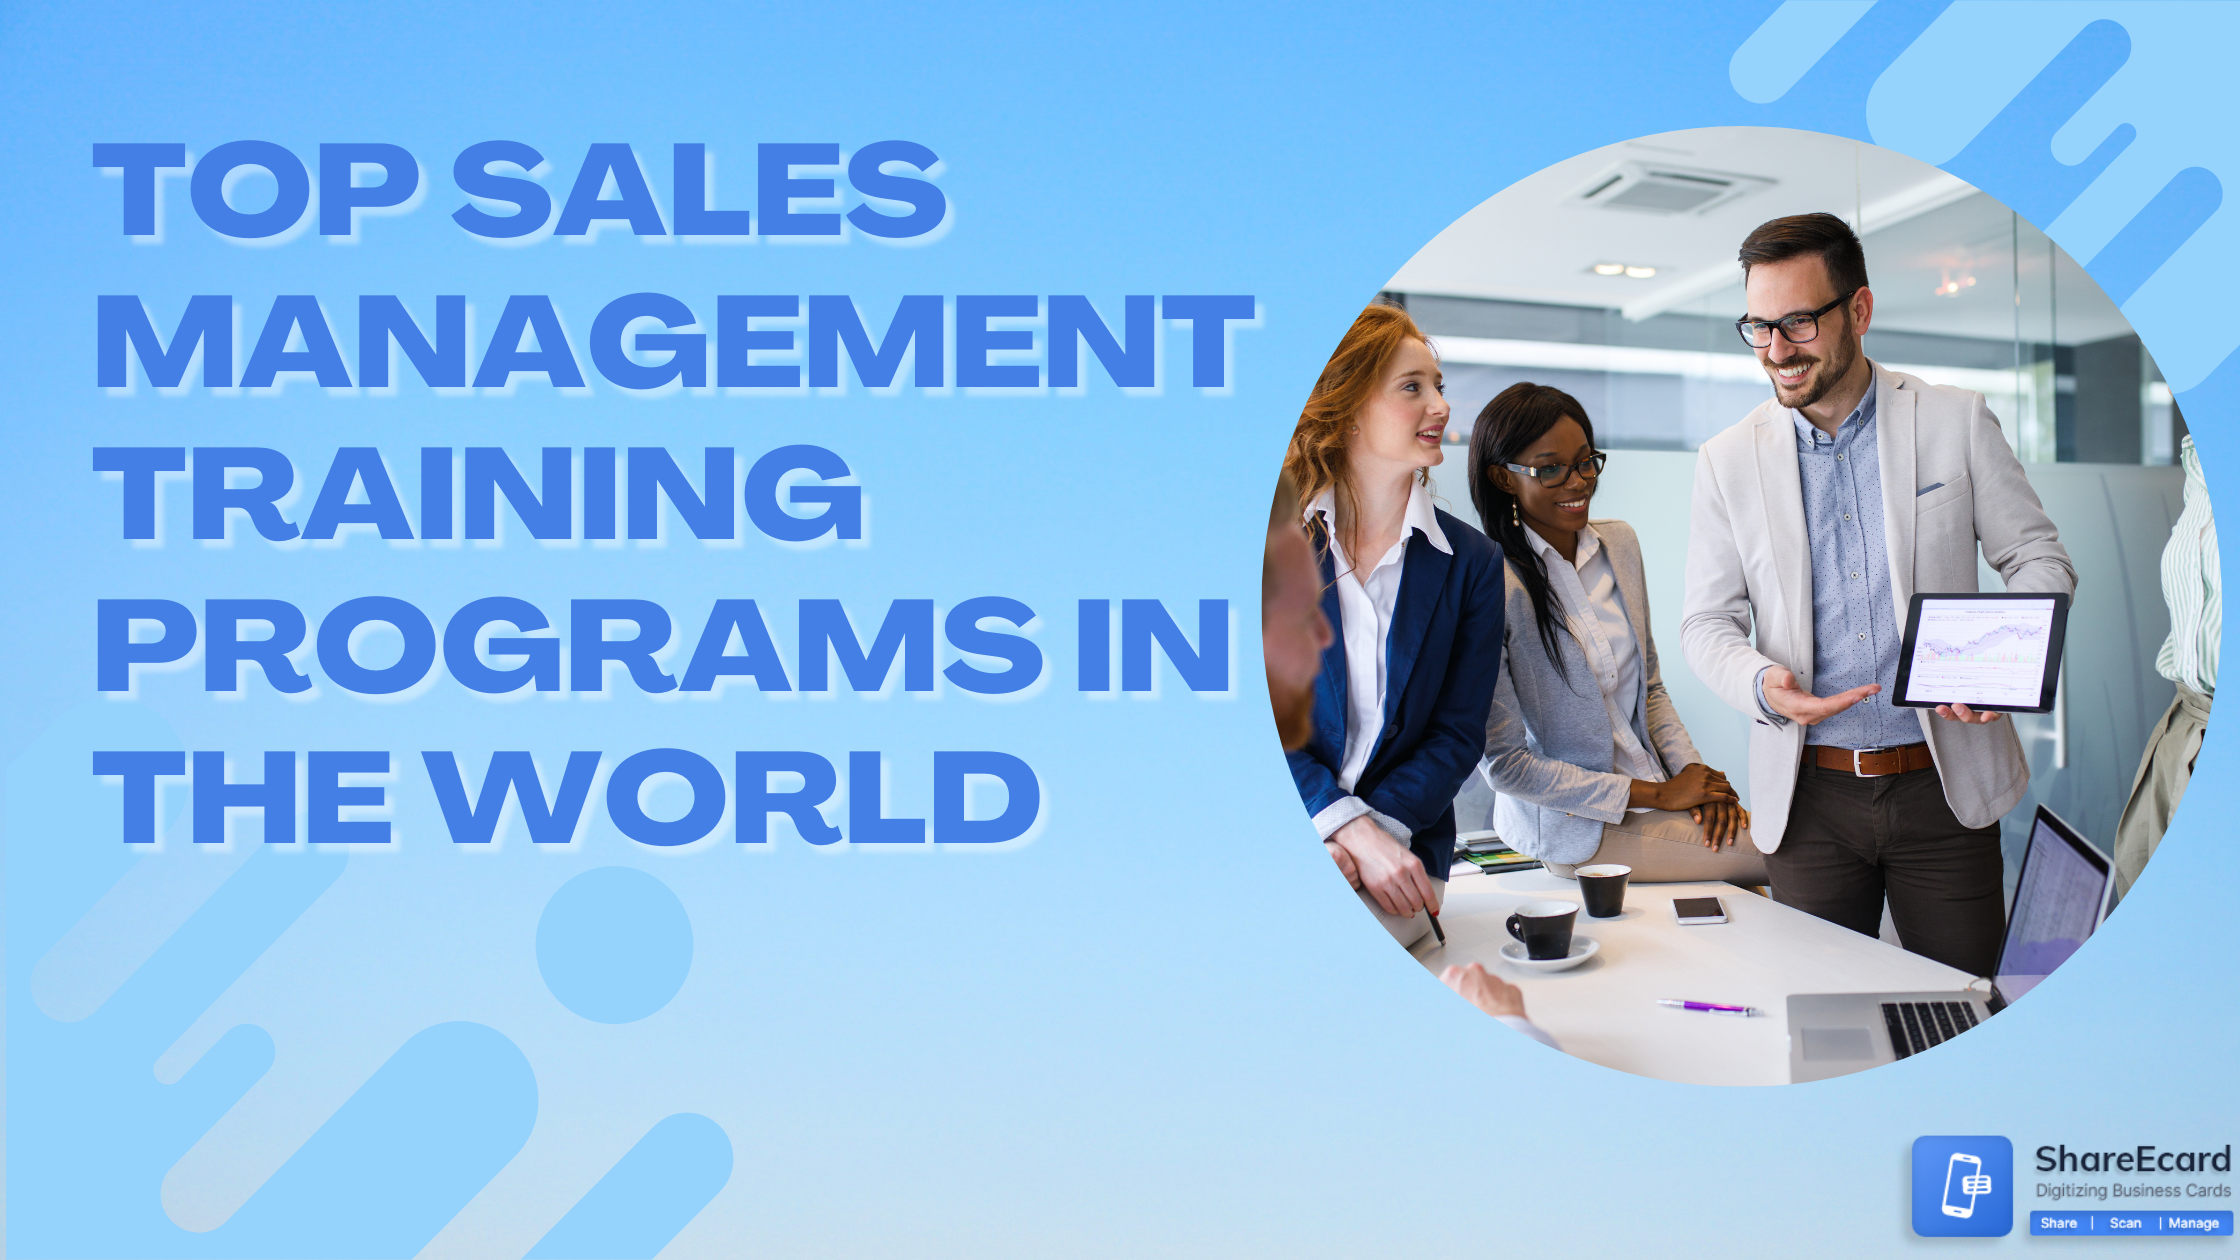 Top Sales Management Training Programs in the world